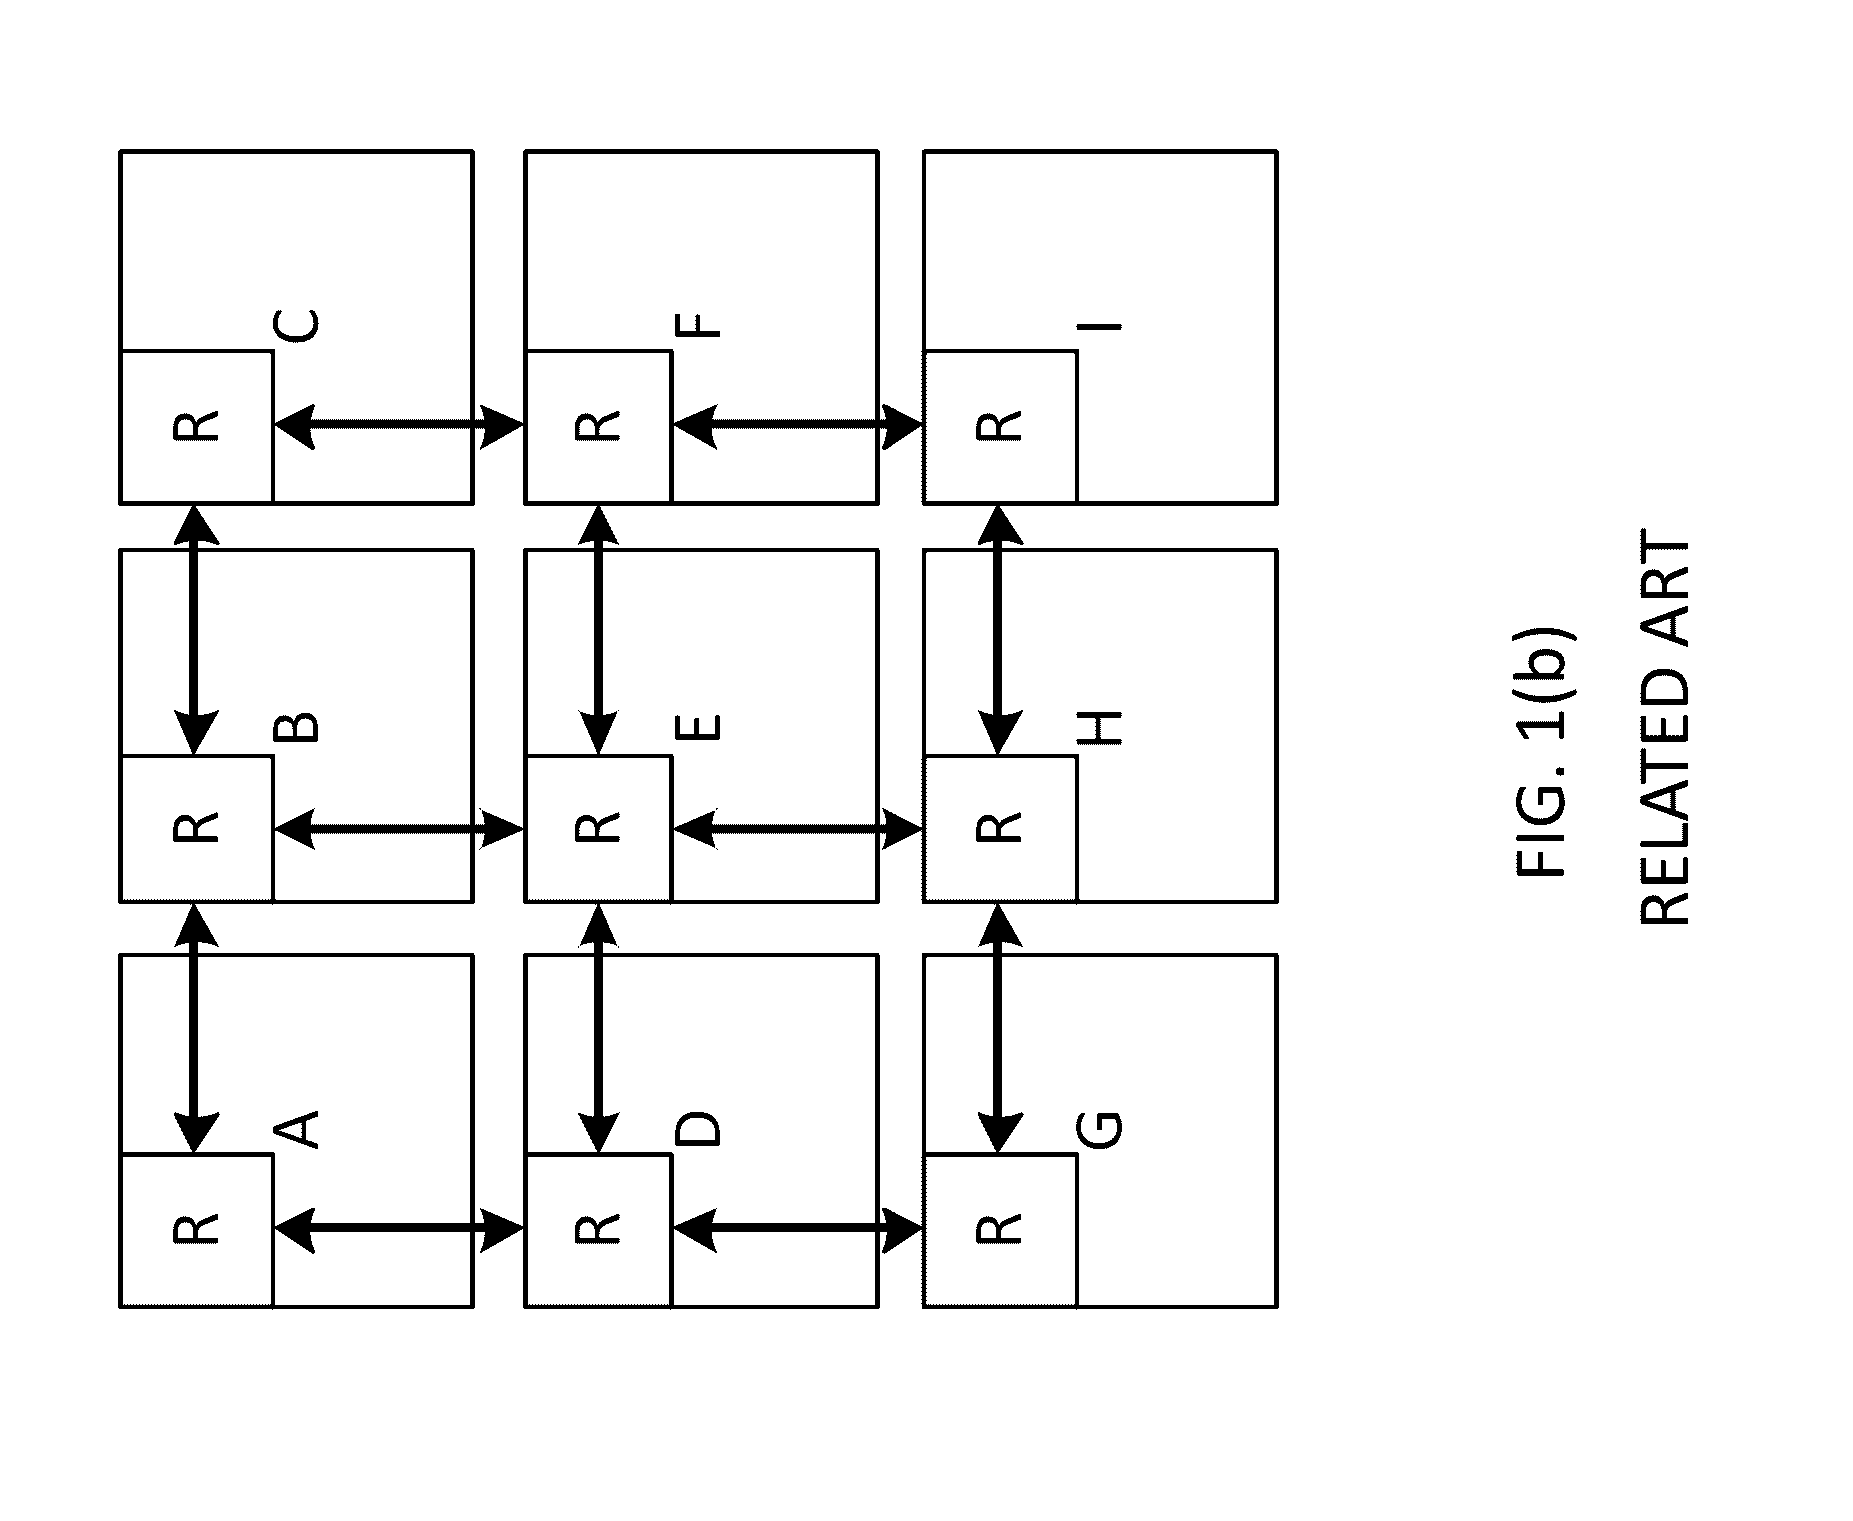 Specification for automatic power management of network-on-chip and system-on-chip